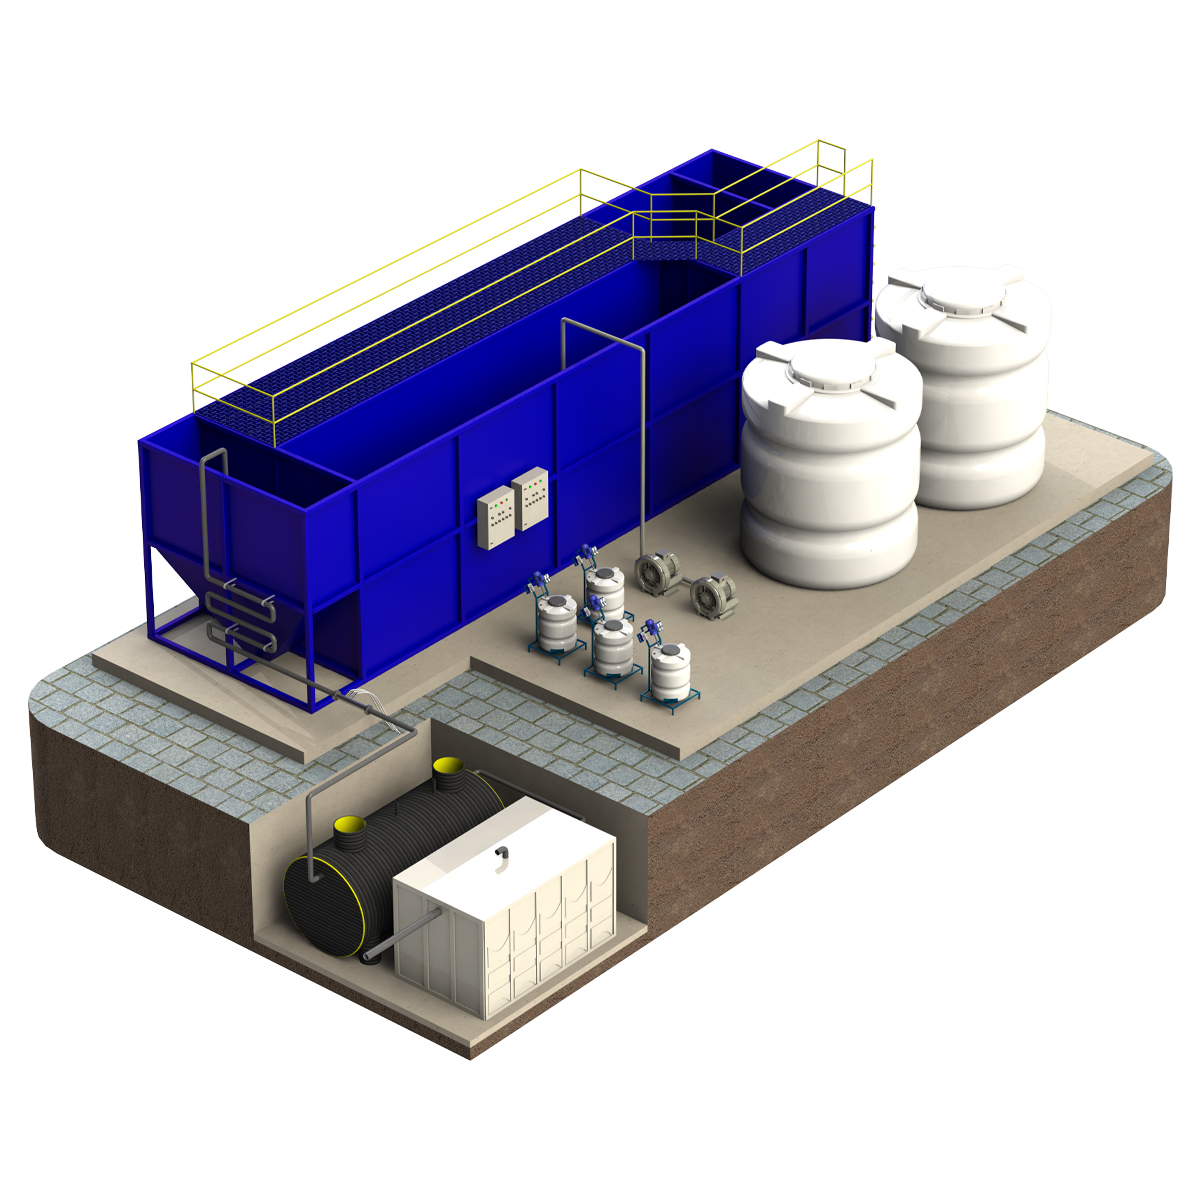 Wastewater treatment package